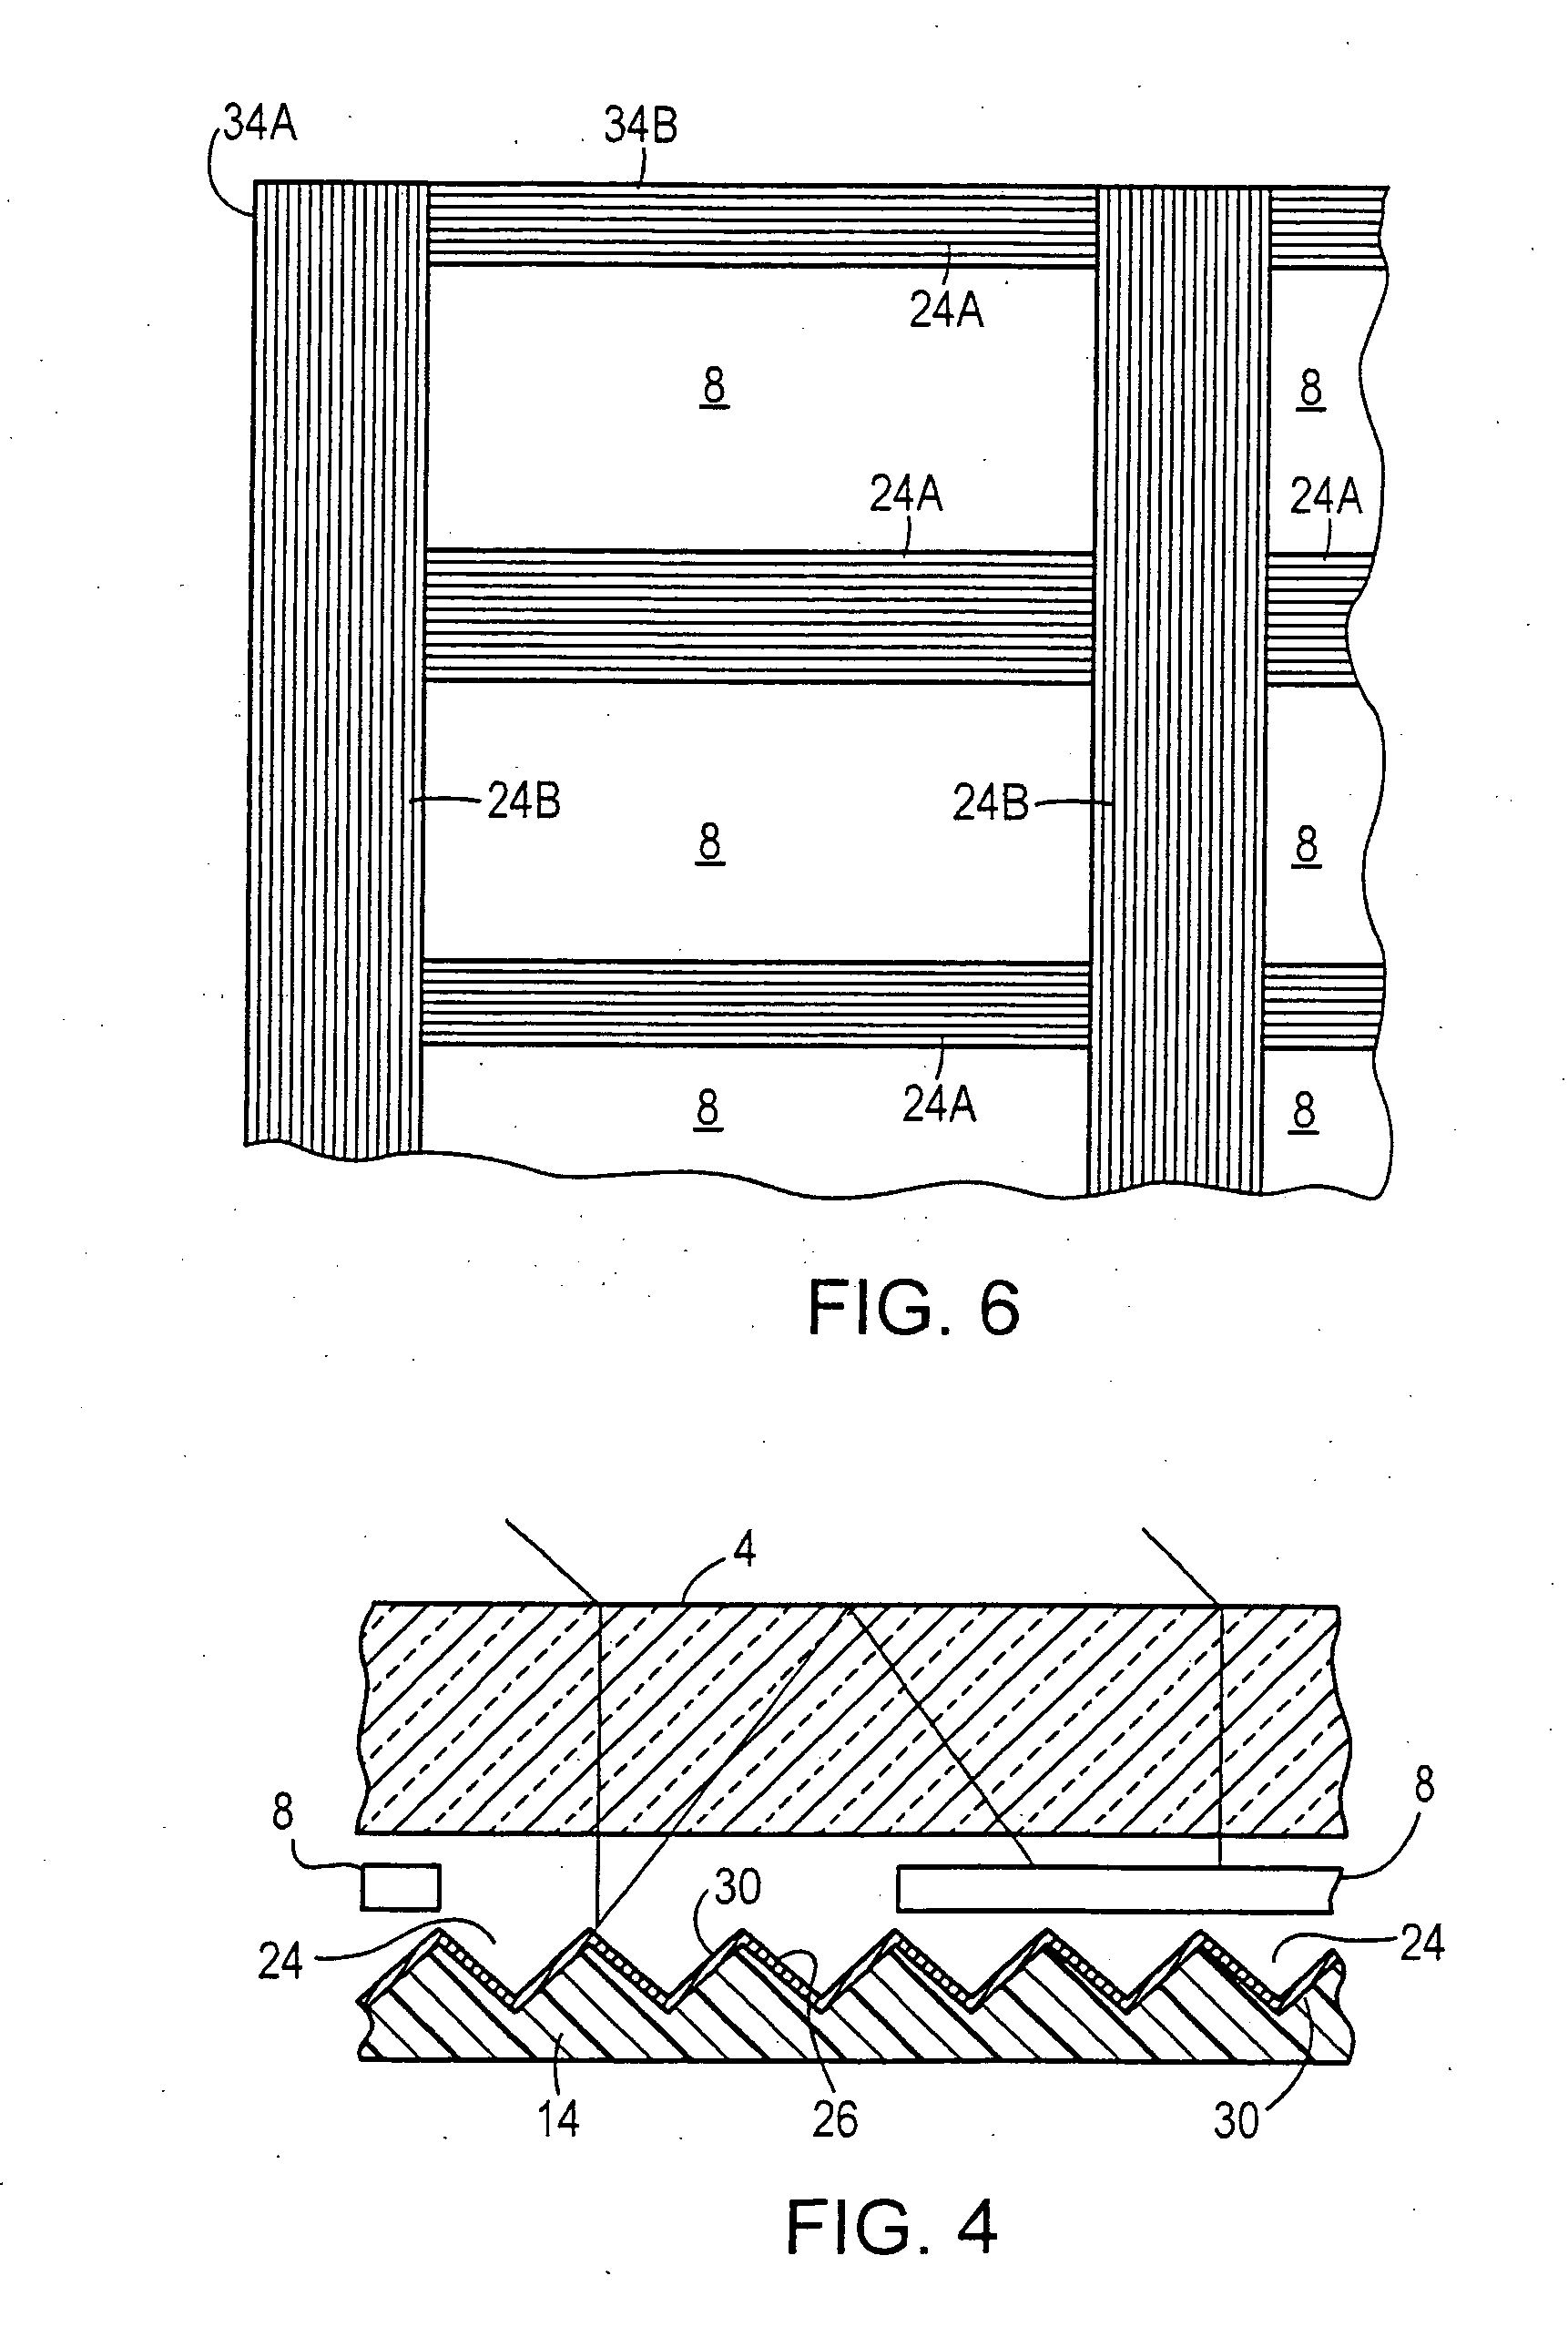 Photovoltaic module with light reflecting backskin